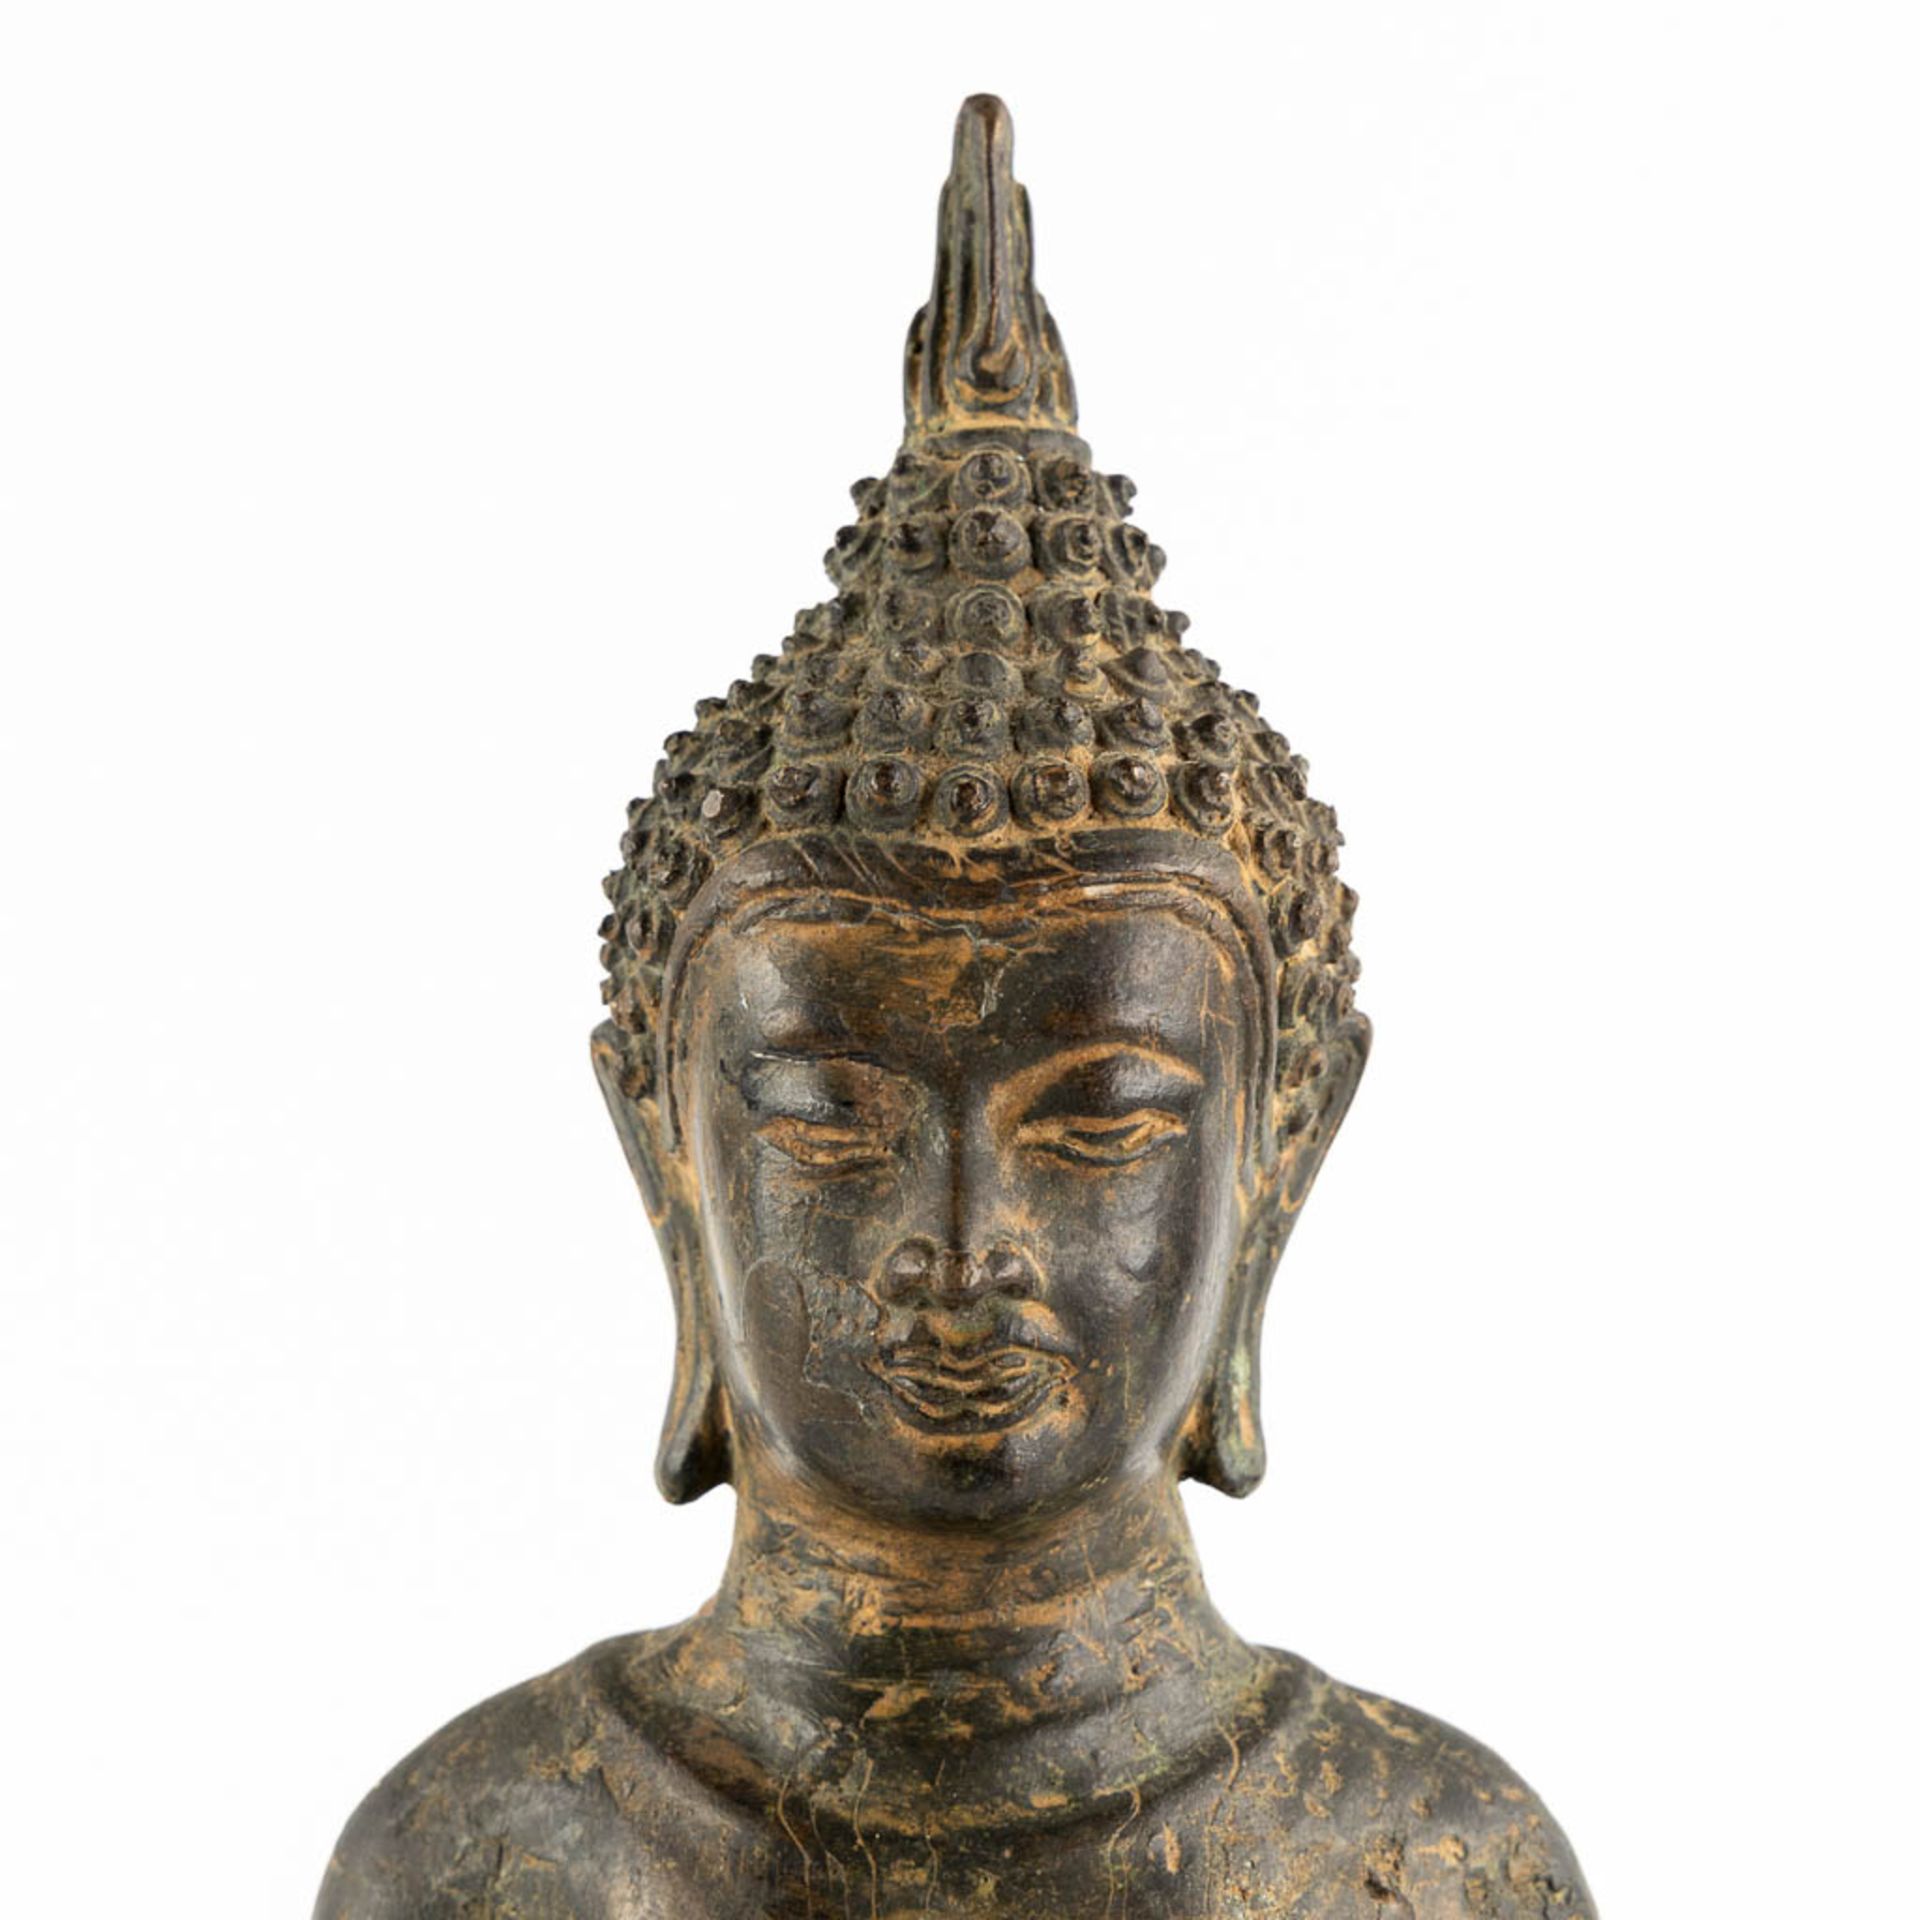 A Thai figurine of a standing Buddha, Patinated bronze. (W:16 x H:44 cm) - Image 7 of 10